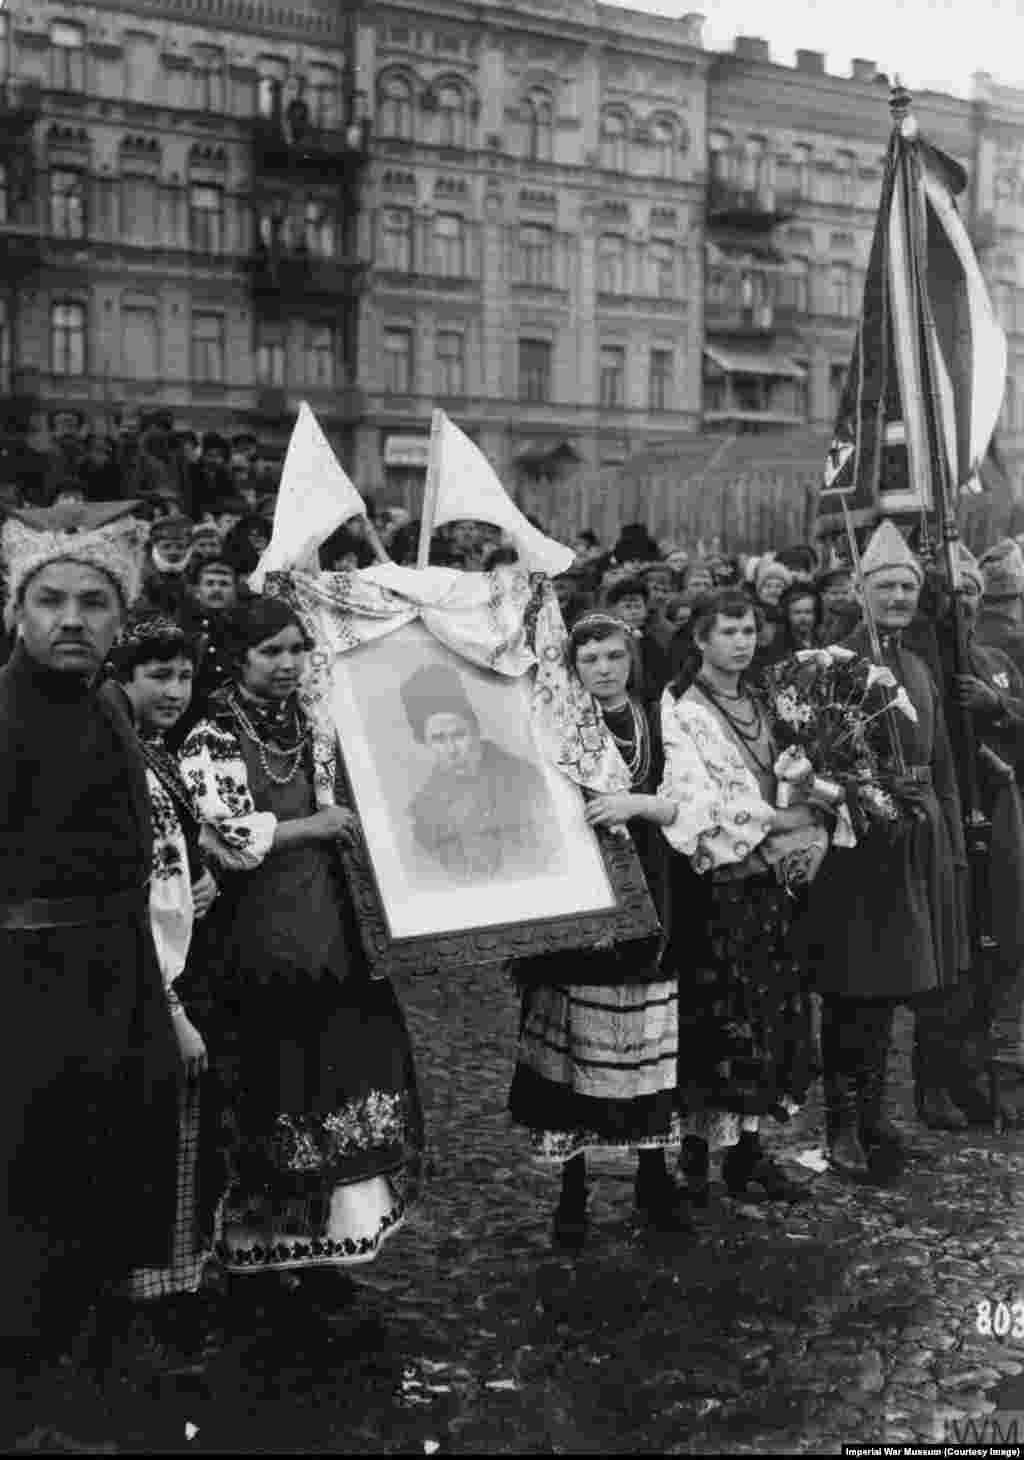 Ukrainians during the German occupation in 1918 hold a portrait of Taras Shevchenko in central Kyiv. Shevchenko was a Ukrainian-language poet and figurehead for Ukrainian independence movements.&nbsp;